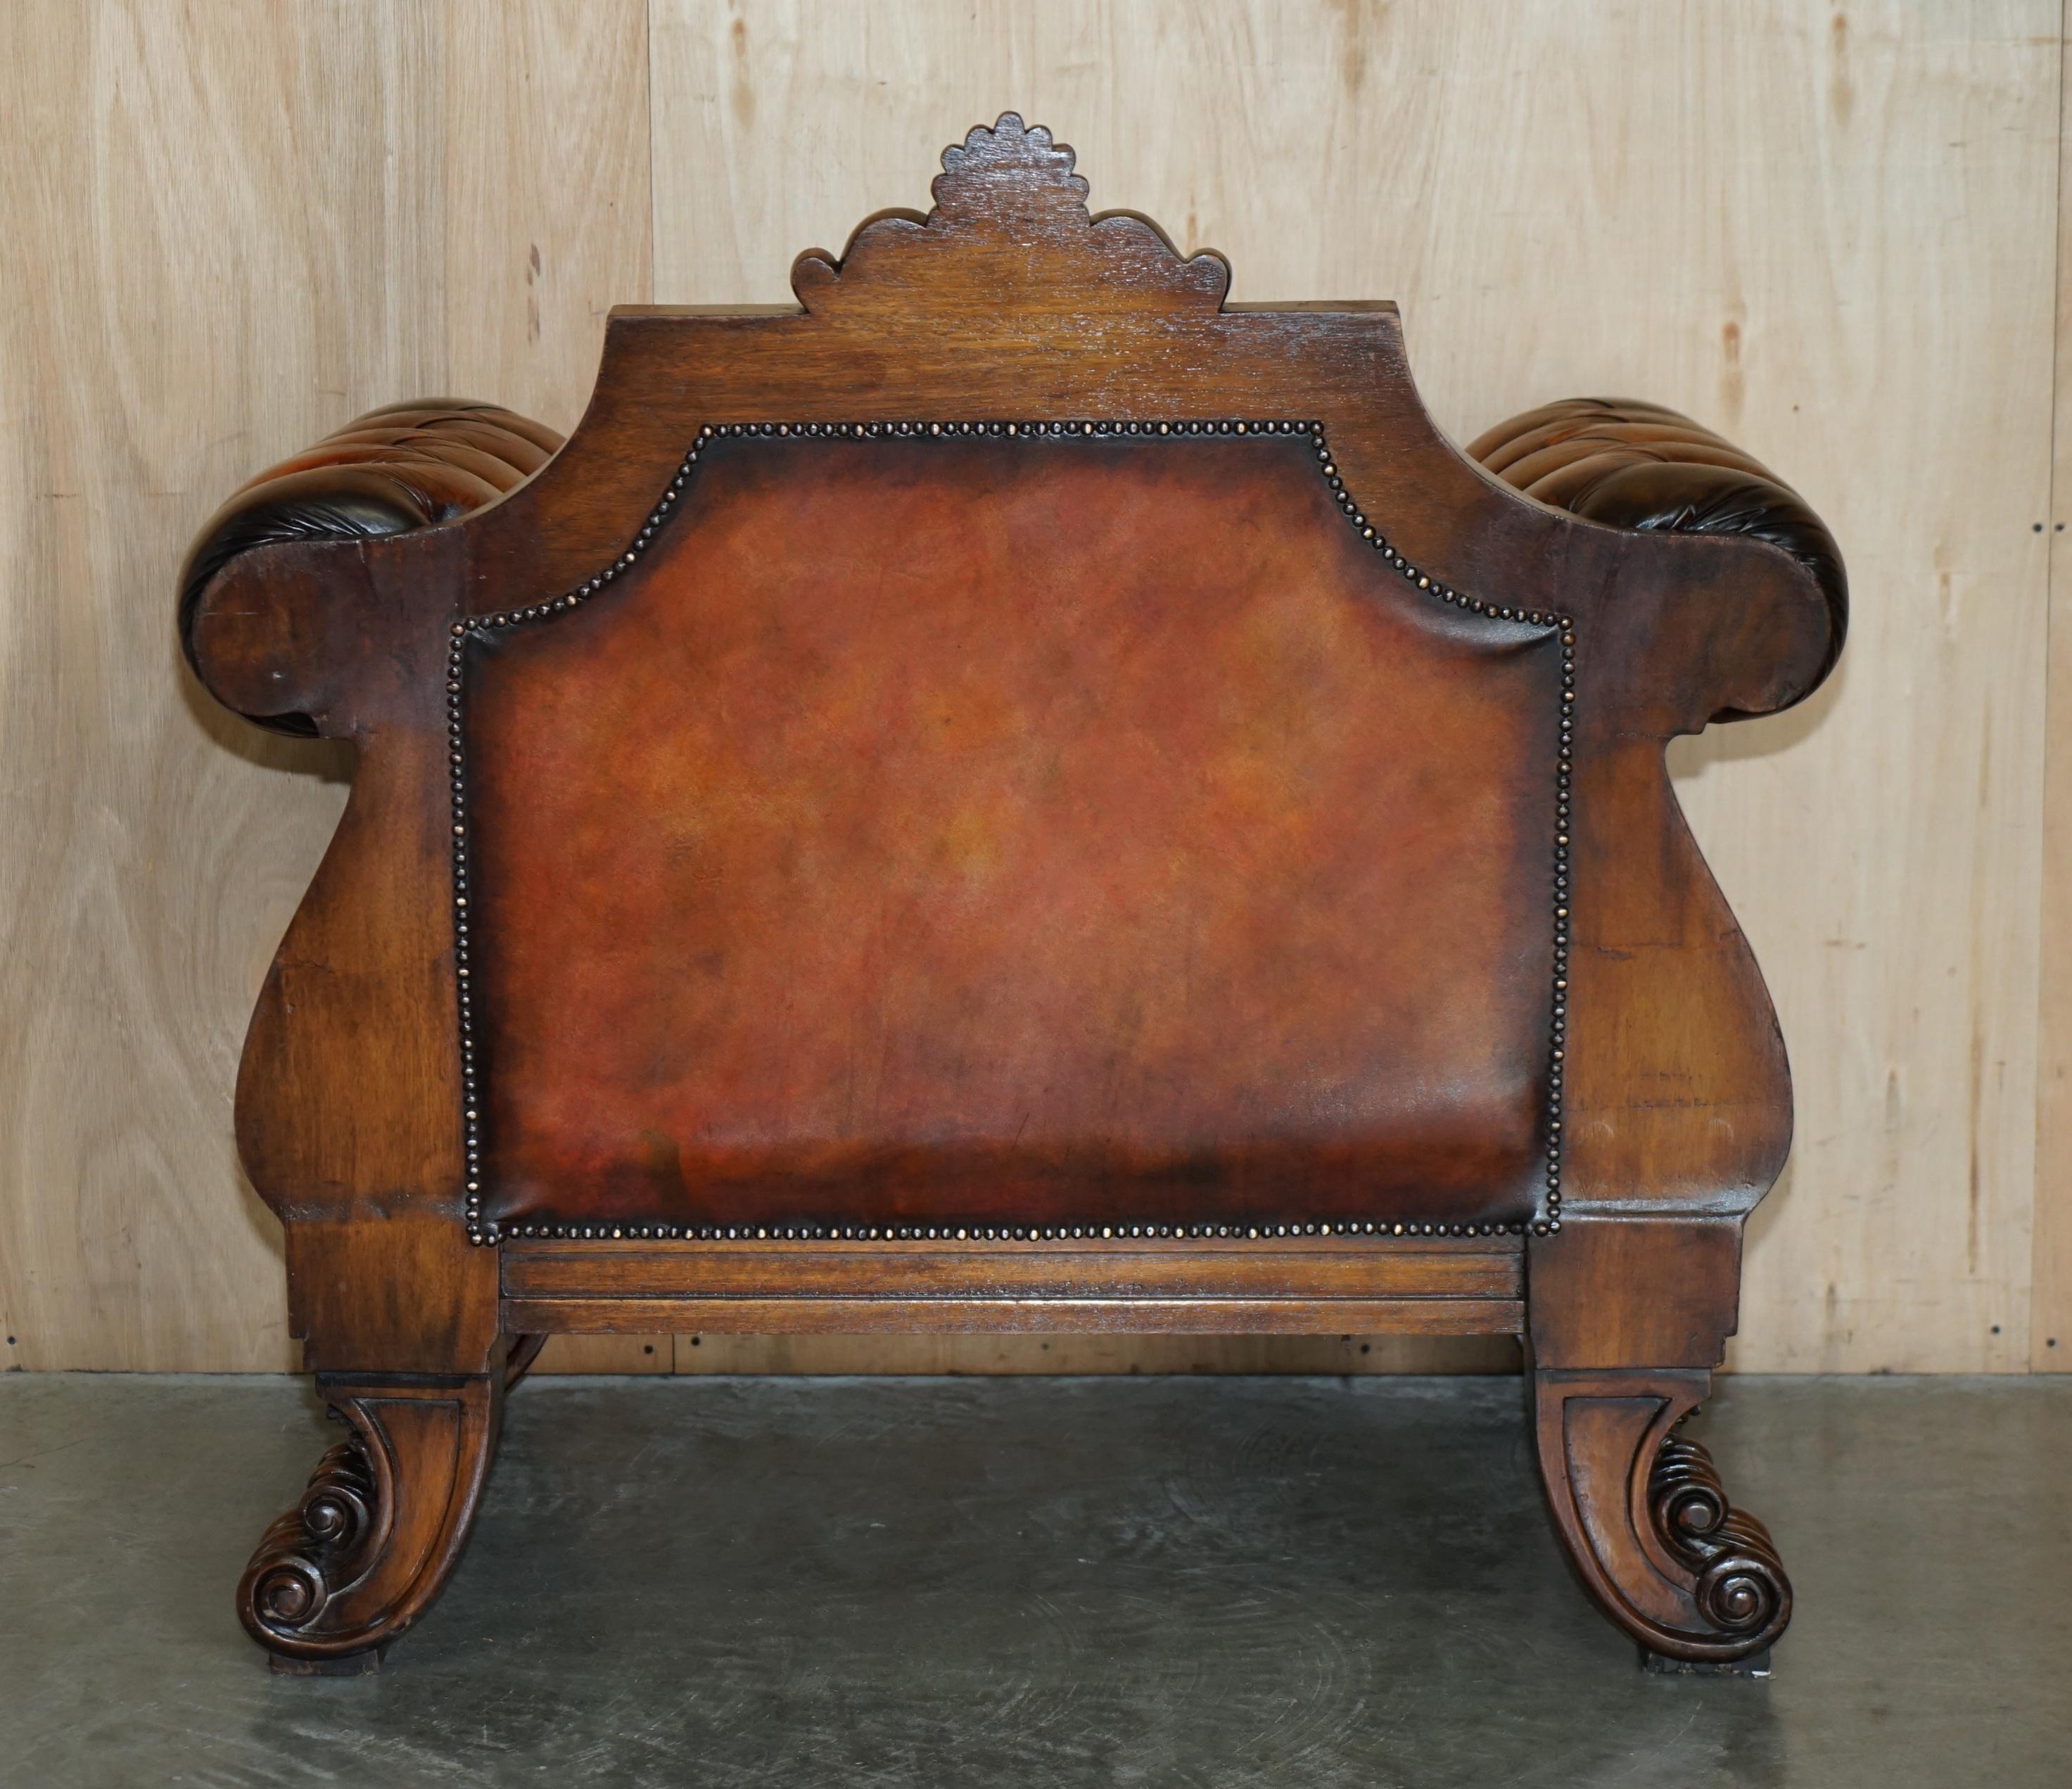 HUGE ORNATELY CARved ANTiQUE FULLY RESTORED CHESTERFIELD KING / QUEENS ARMCHAIR im Angebot 12